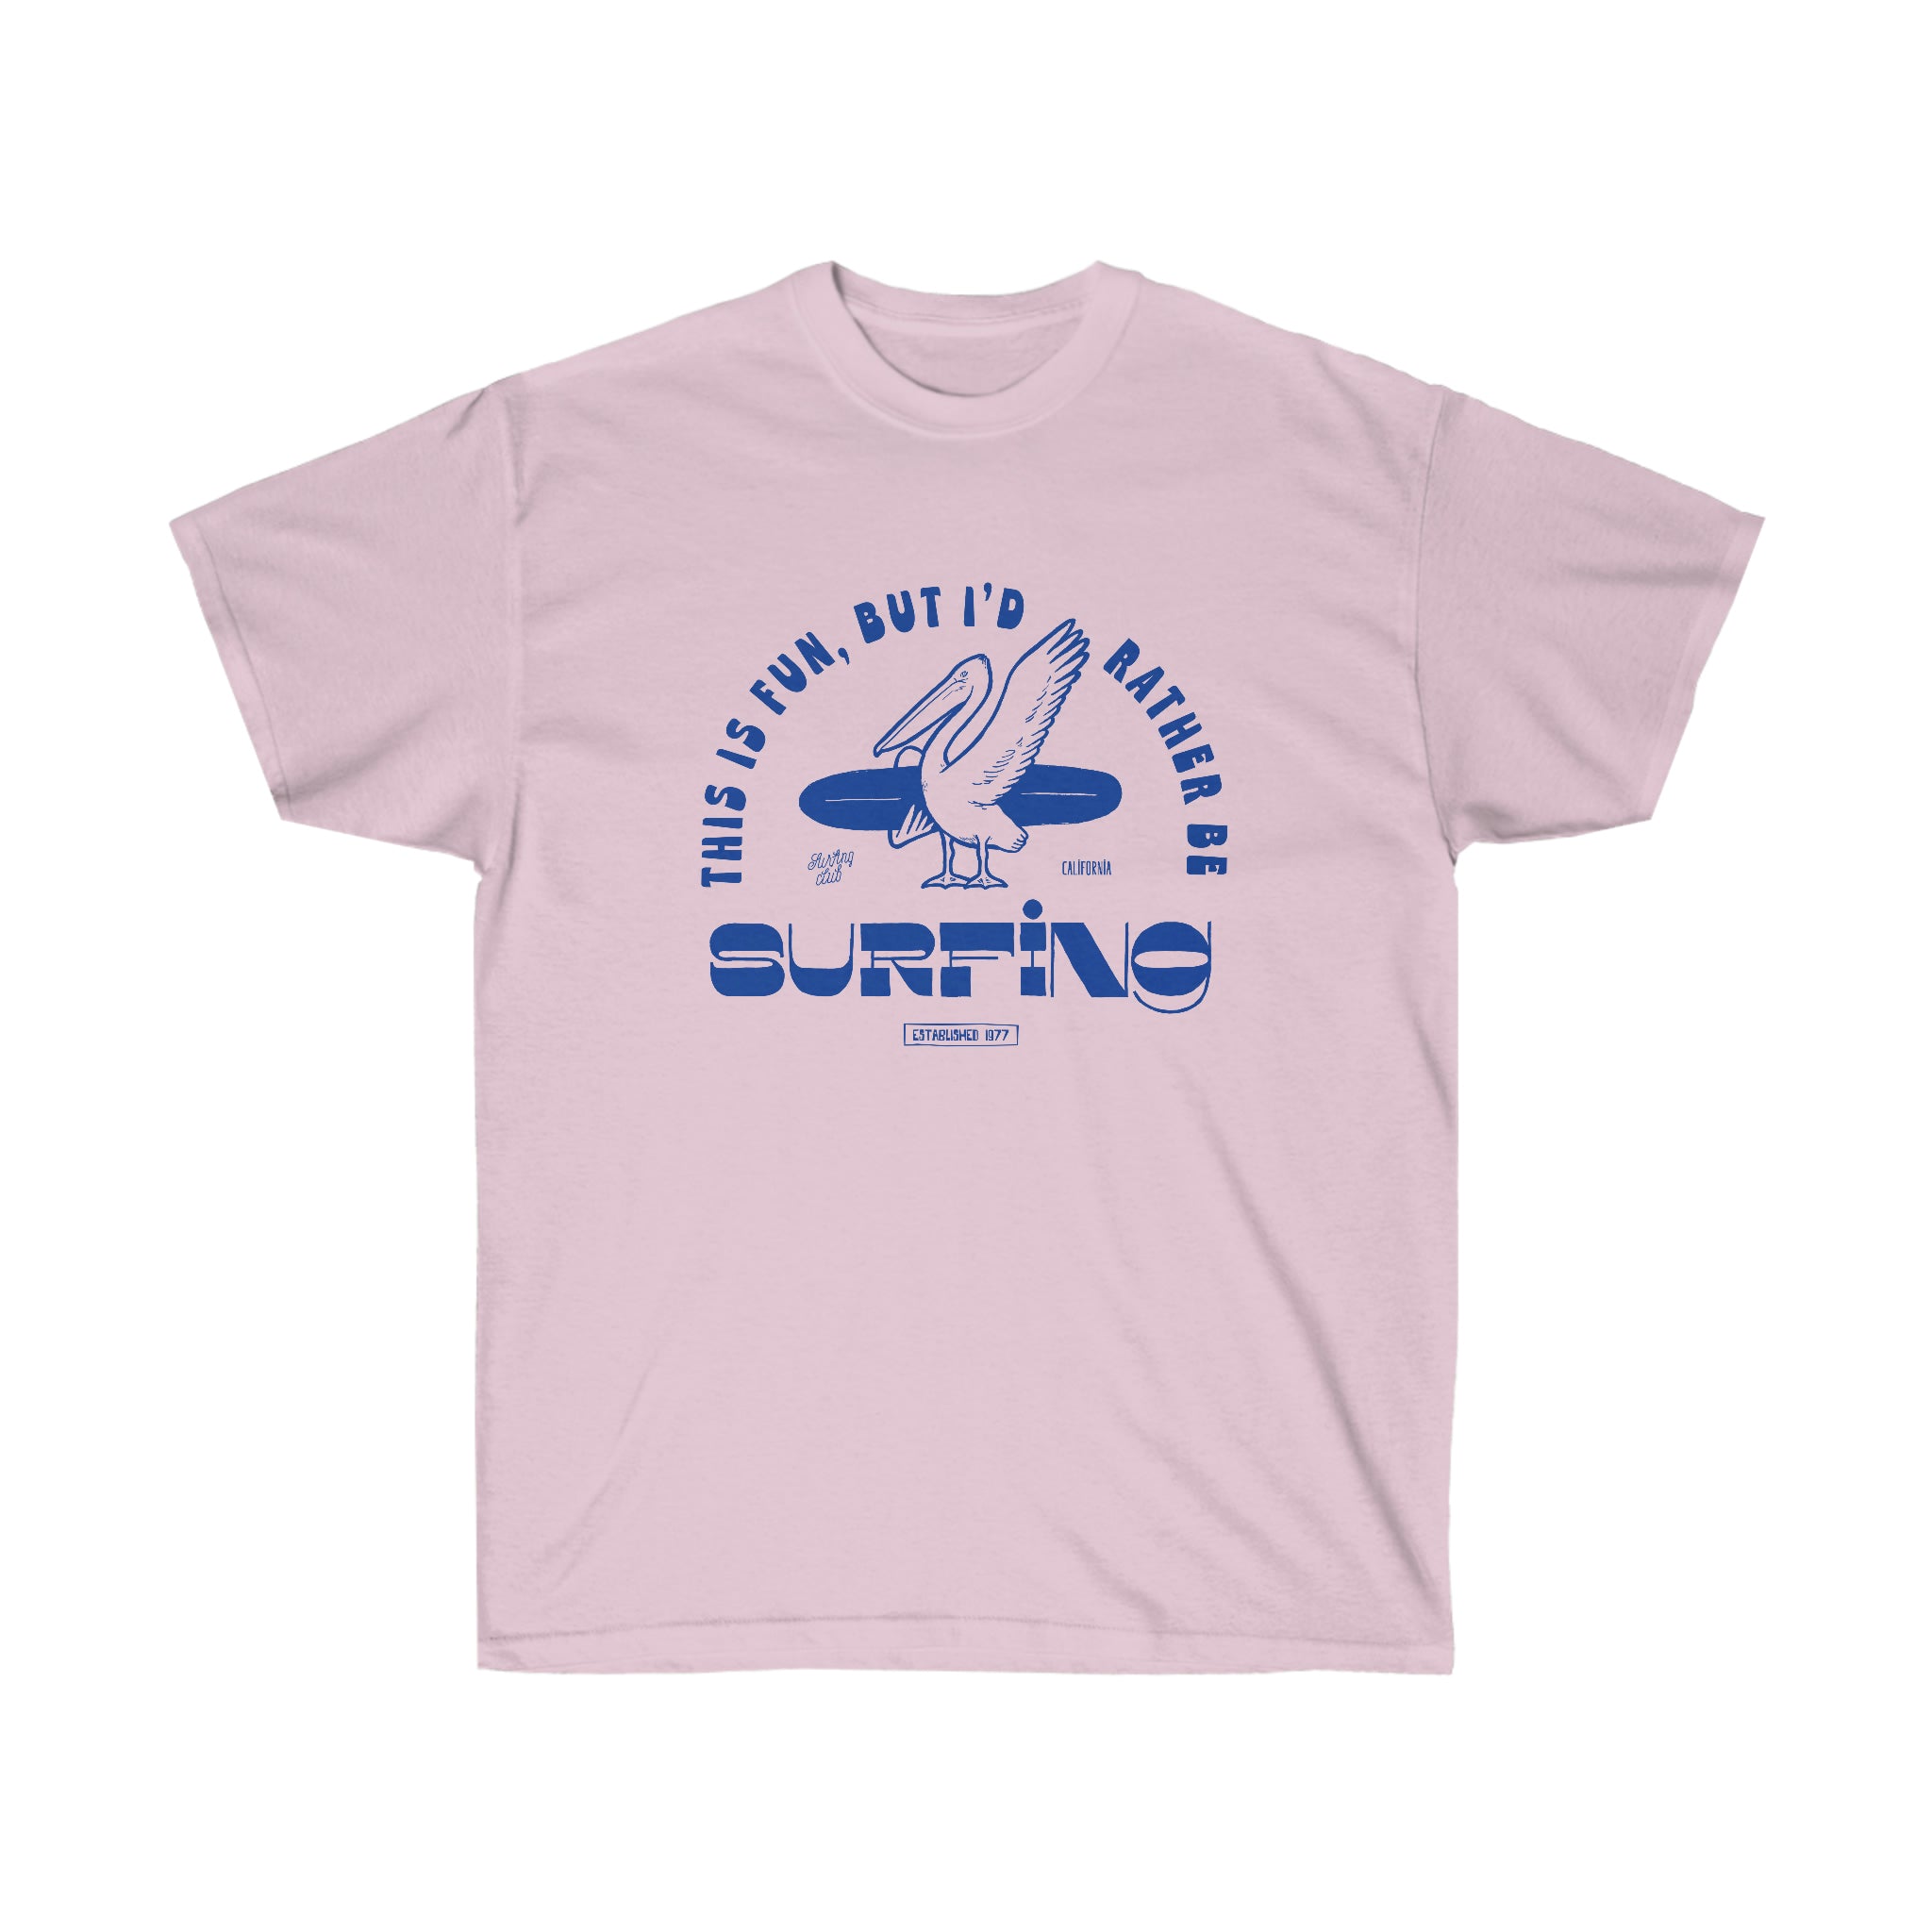 I'd rather be surfing pelican graphic tee. Available in pink and red.  This unisex ultra cotton tee is a classic. Quality cotton construction and the shoulders are tapped for a good upper-body fit. There are no side seams, ensuring a 